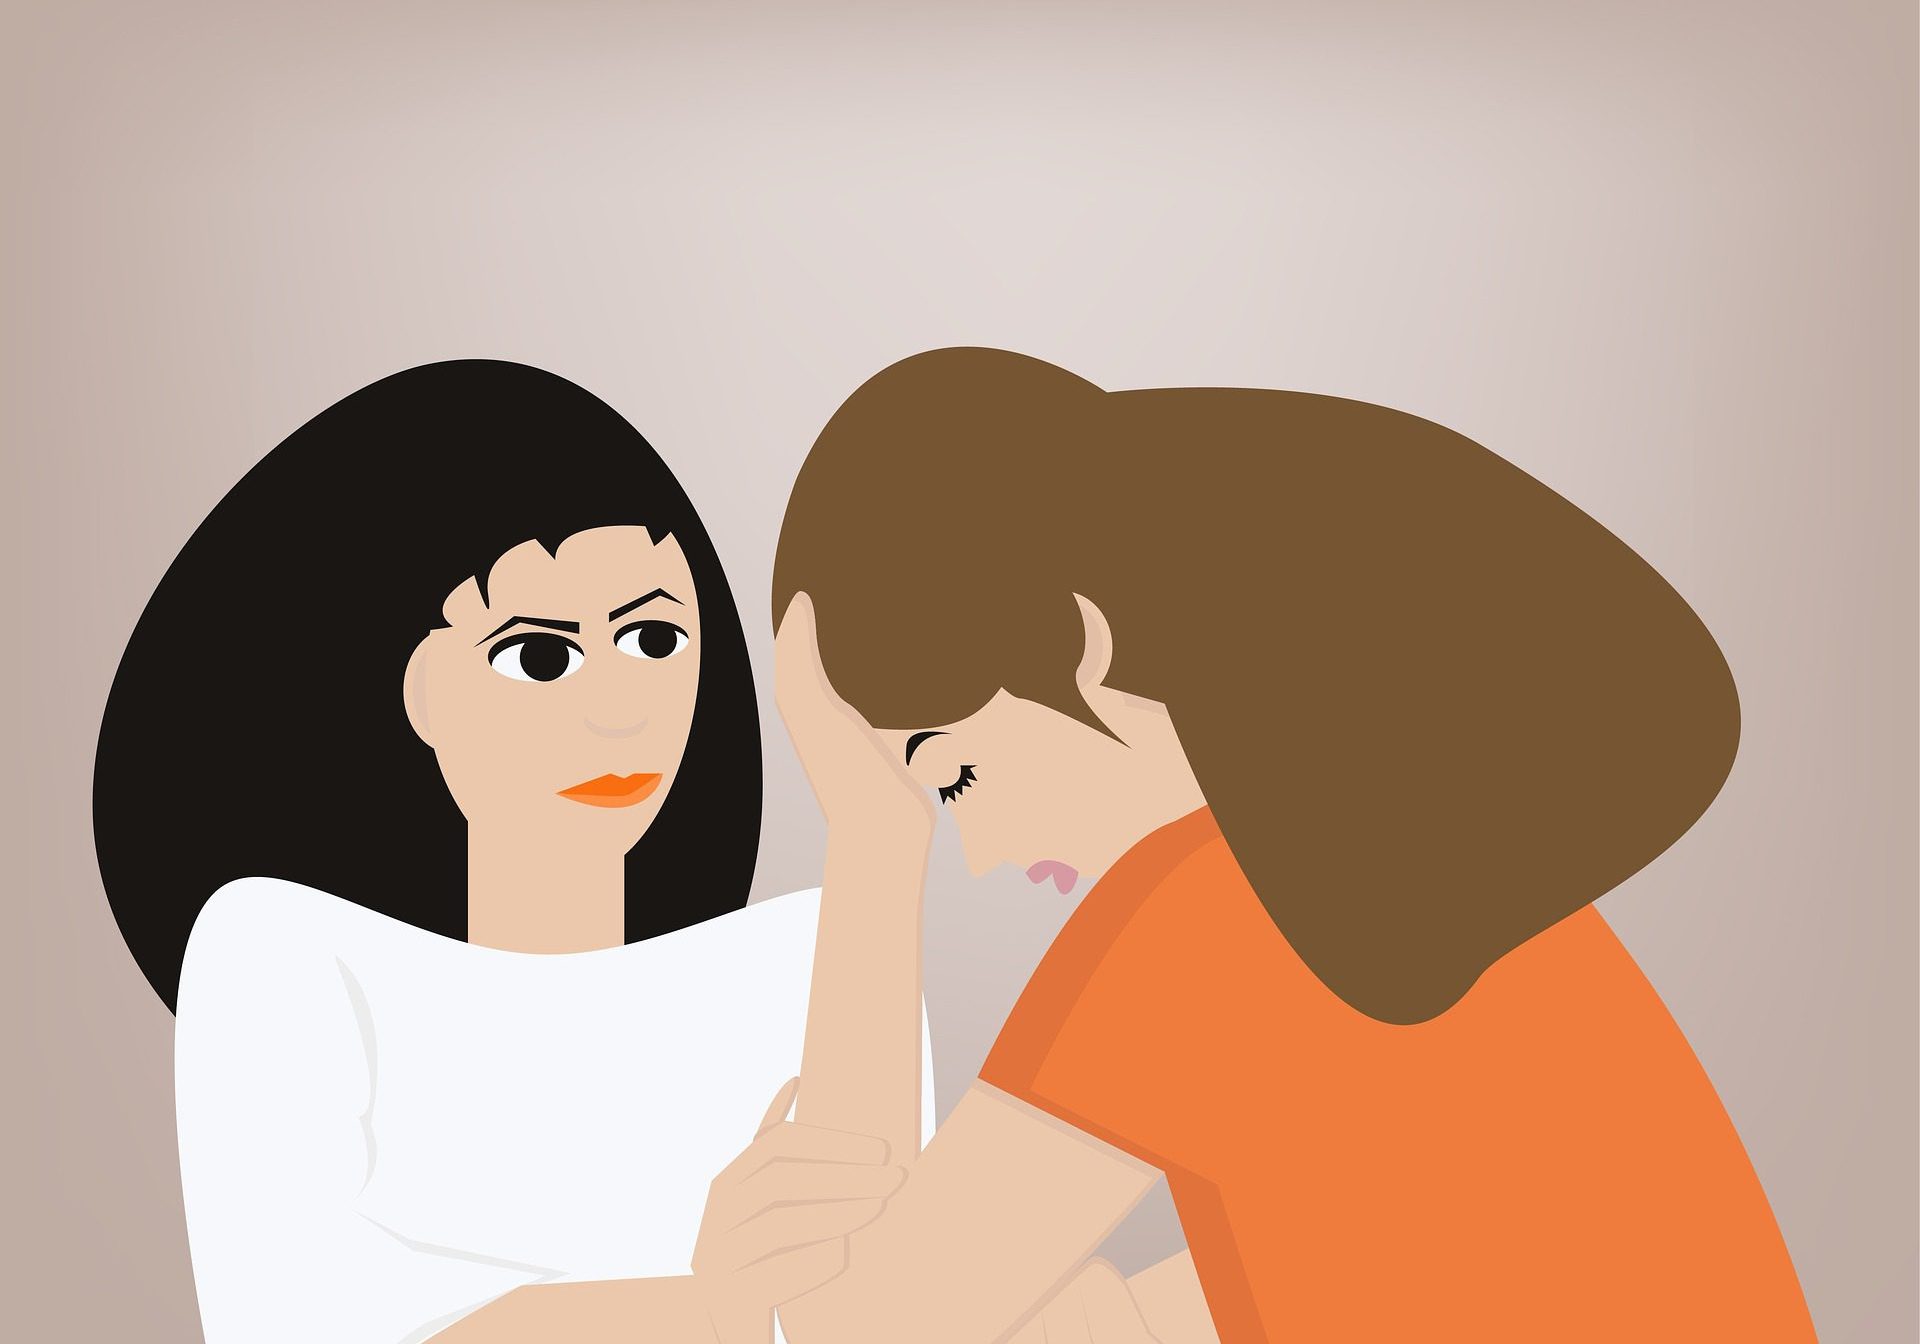 A cartoon of a woman with long black hair comforting a woman who has her head in her hands.